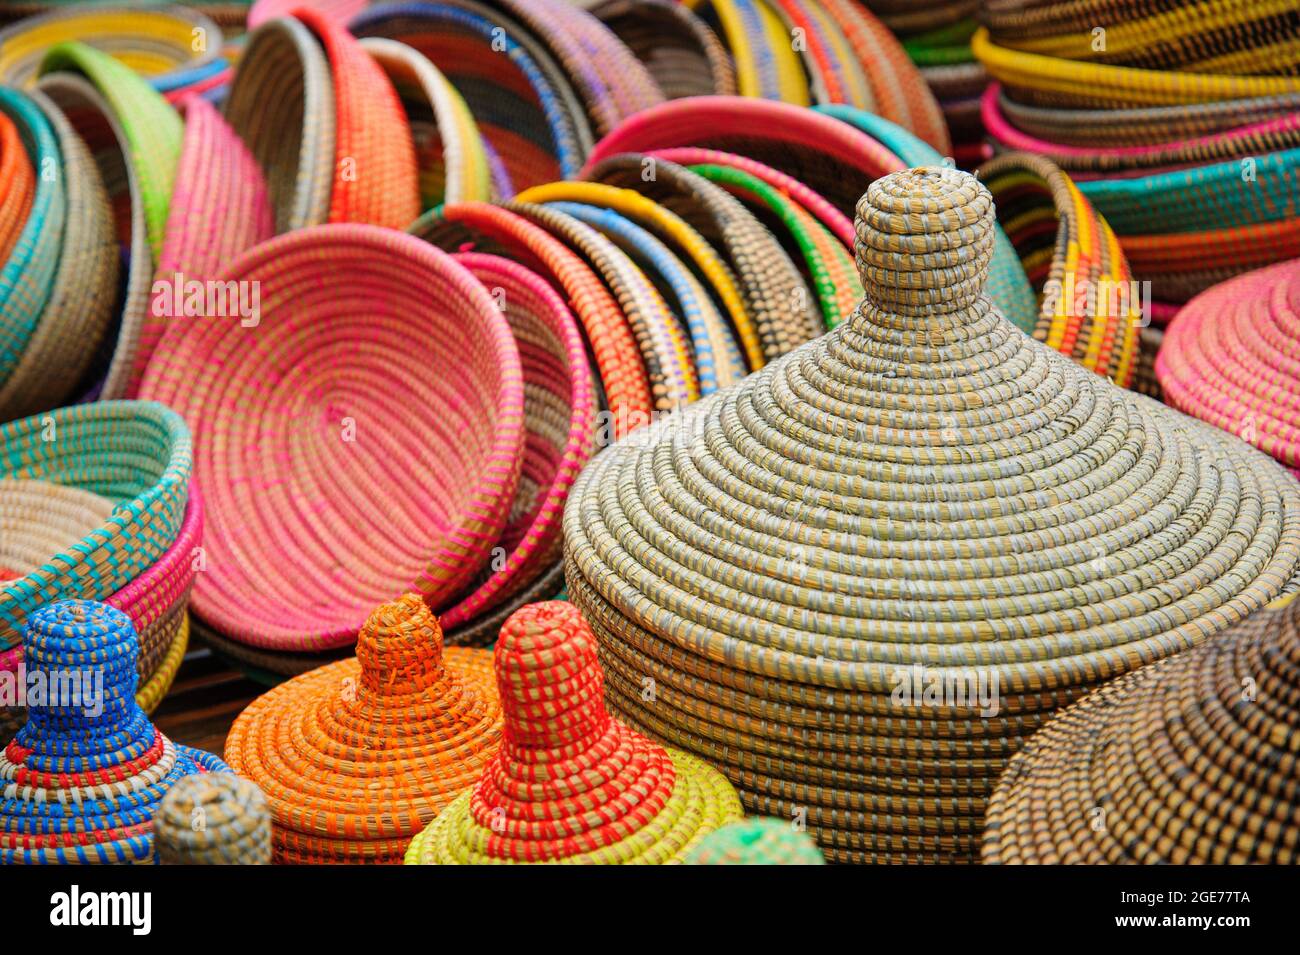 Colorful handmade baskets on the market. Stock Photo